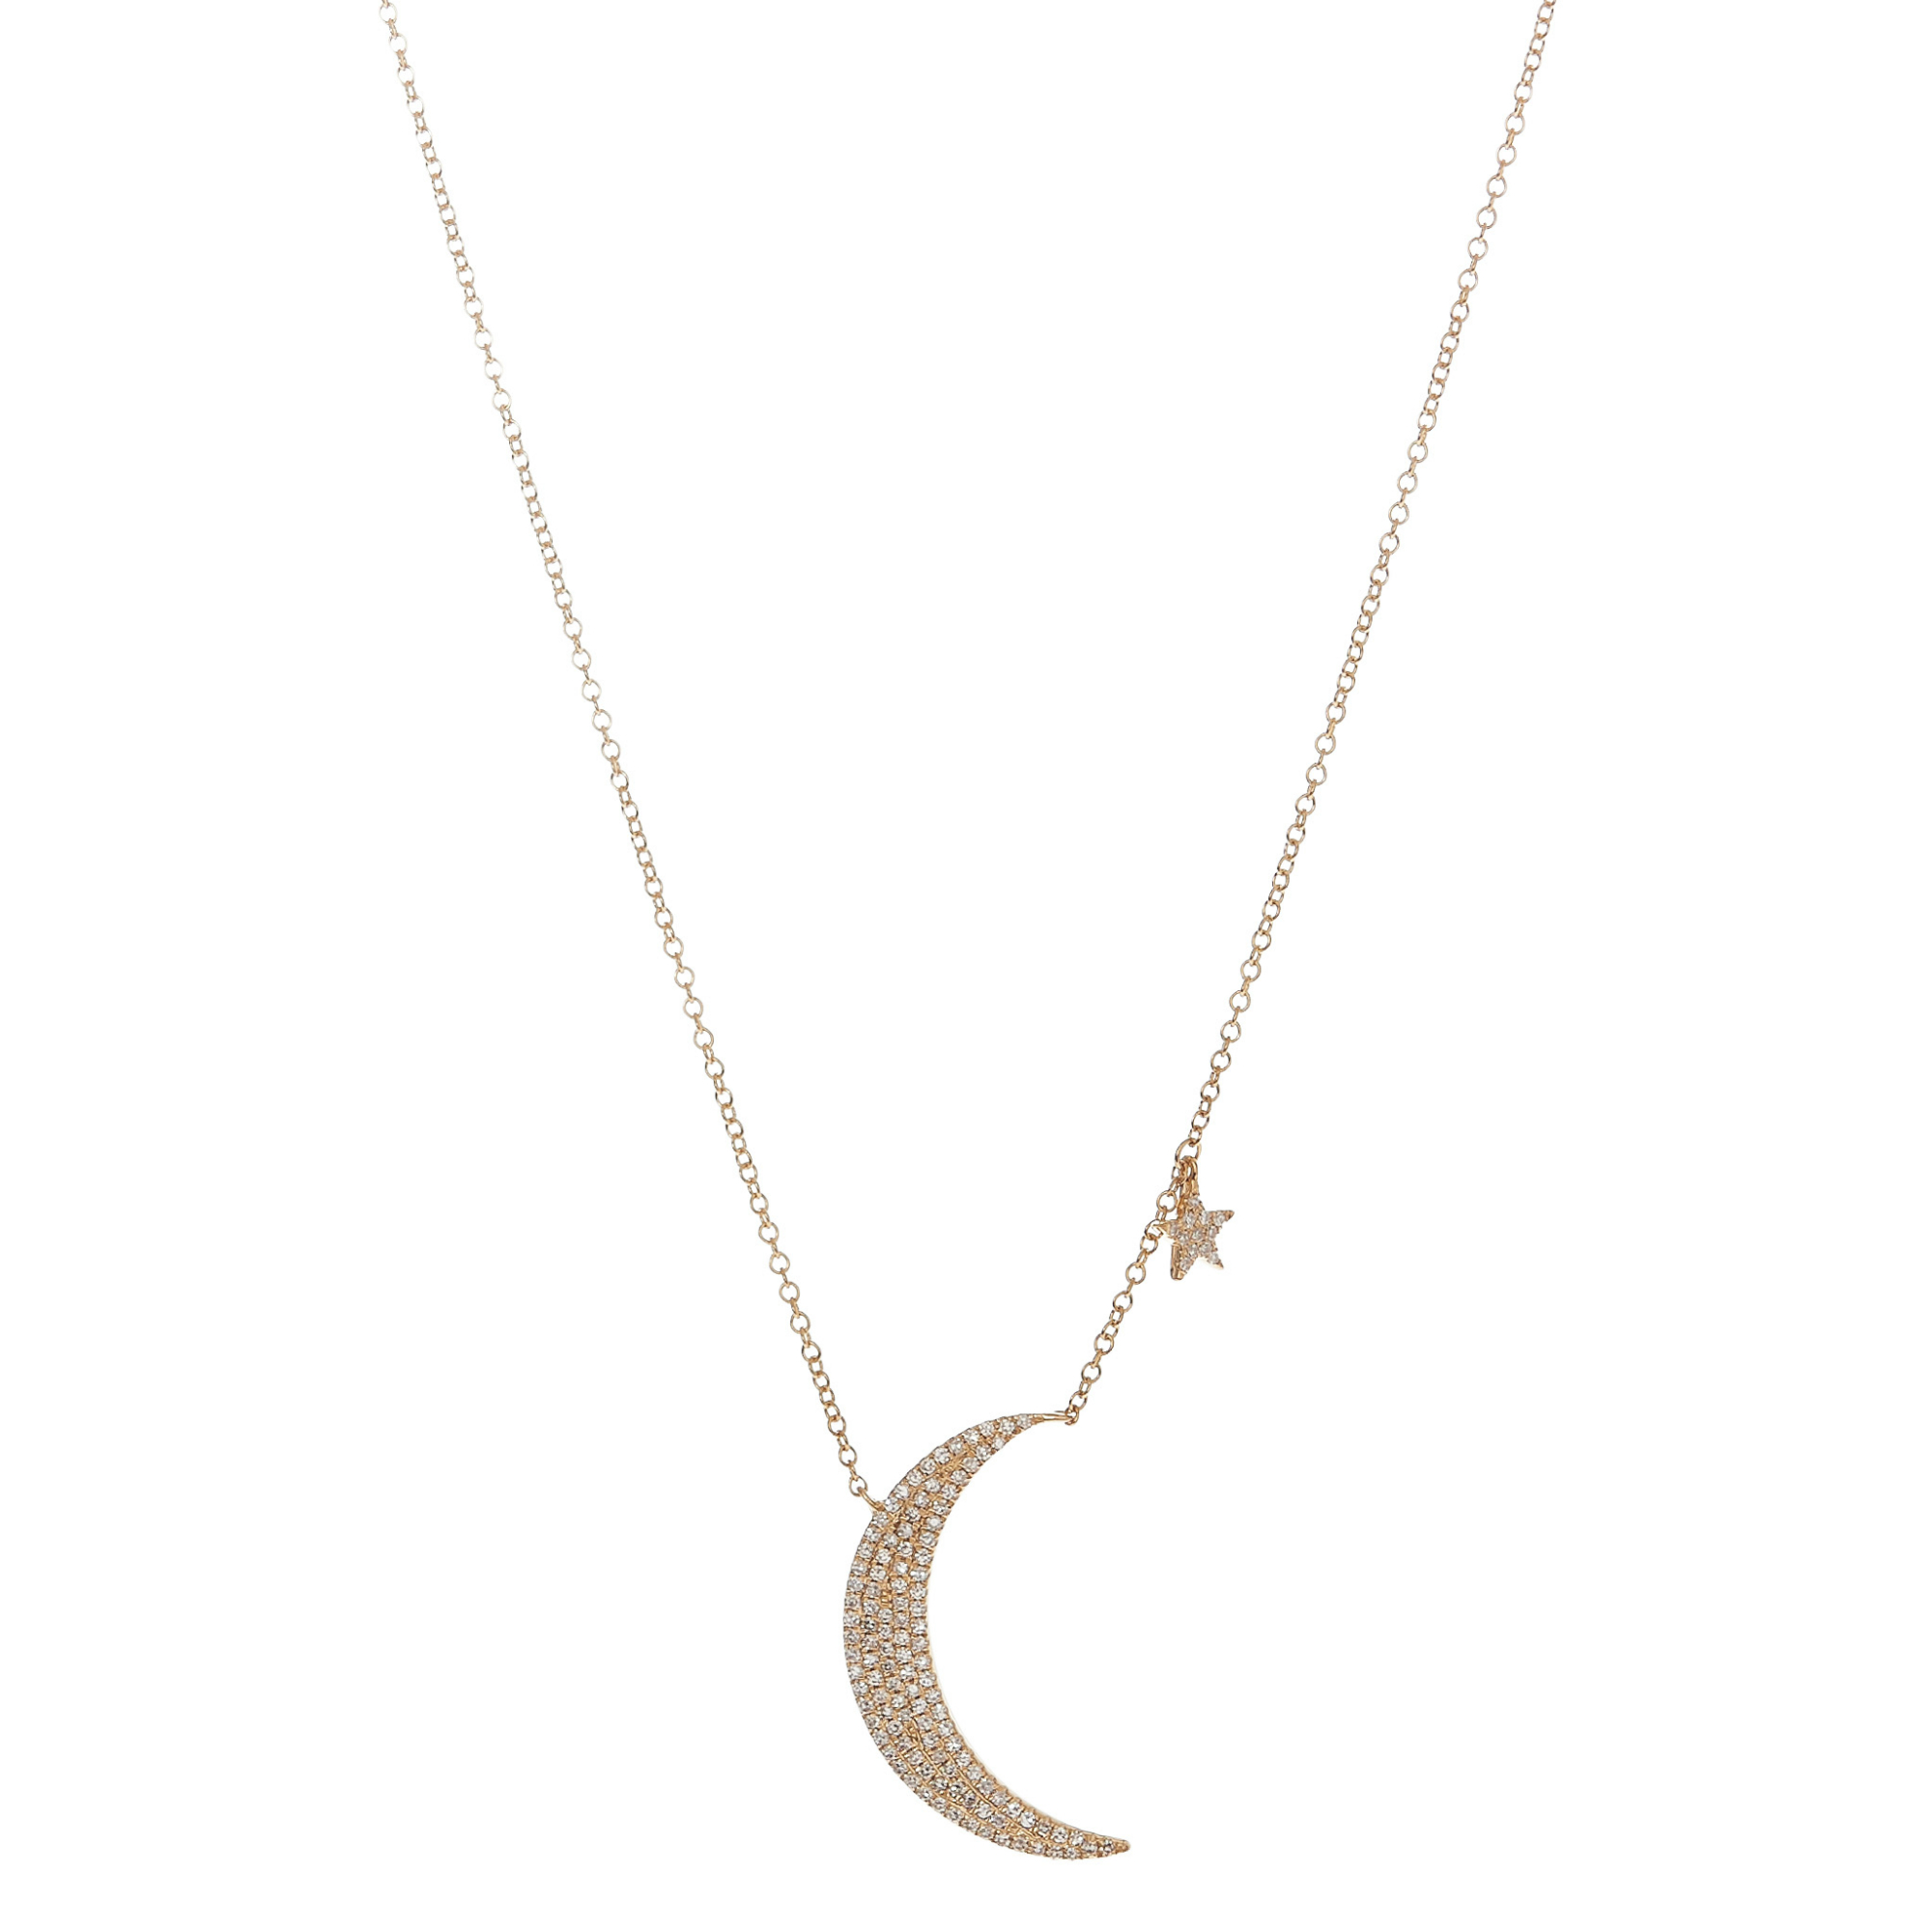 Silver Women Lariat Necklace,Haluoo 925 Sterling Silver Moon Star Y Necklace Crescent Moon Pendant Necklace Delicate Gold Star Pendant Necklace Girls Moon Star Lariat Jewelry 